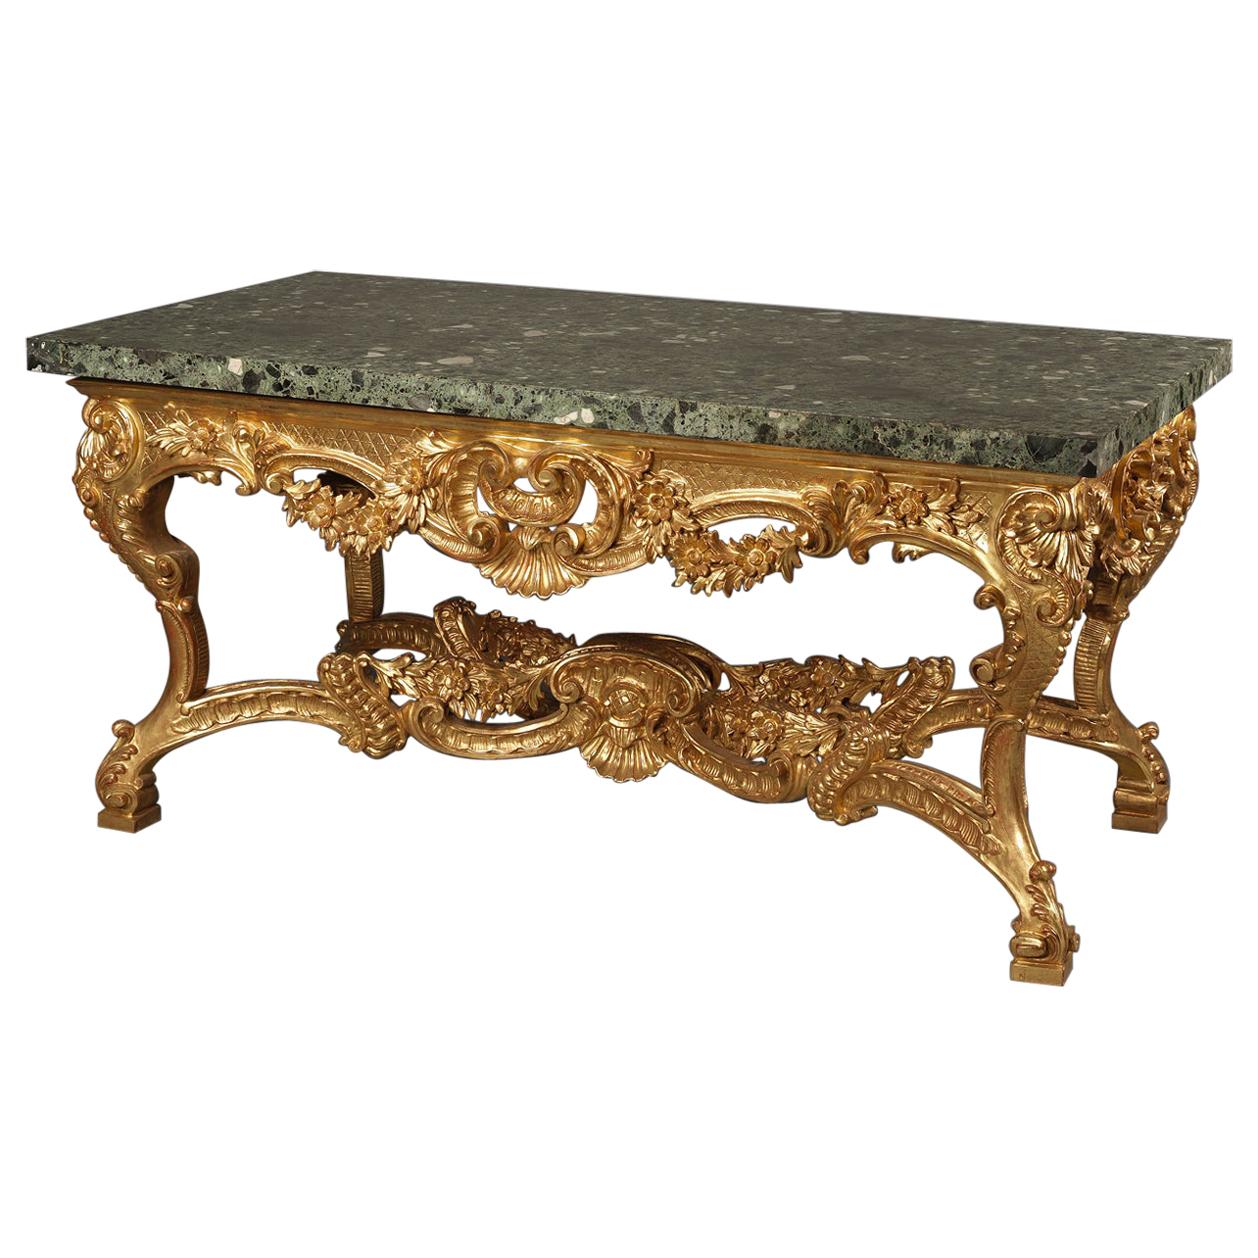 Italian Carved Giltwood Centre Table with a Verde Antico Marble Top, circa 1860